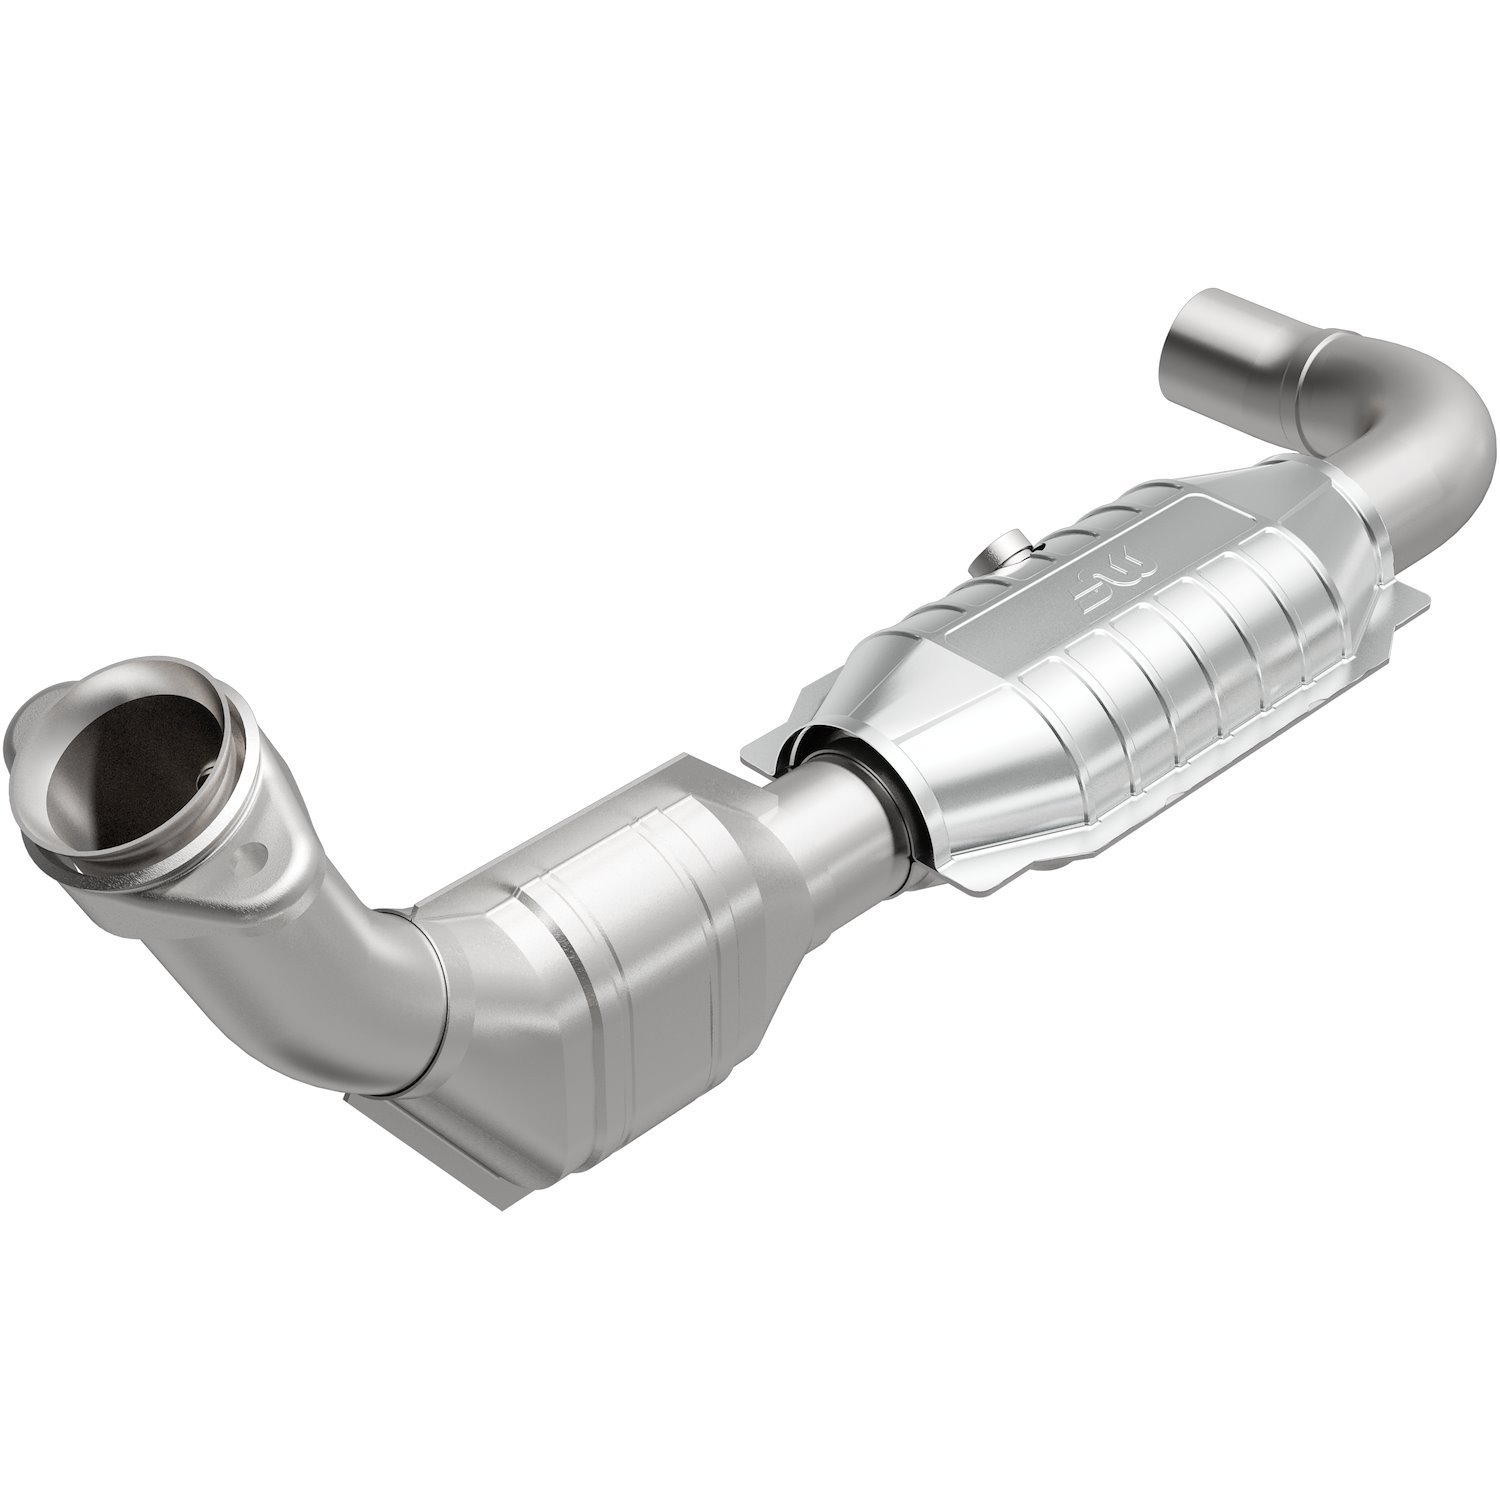 1999-2000 Ford Expedition OEM Grade Federal / EPA Compliant Direct-Fit Catalytic Converter